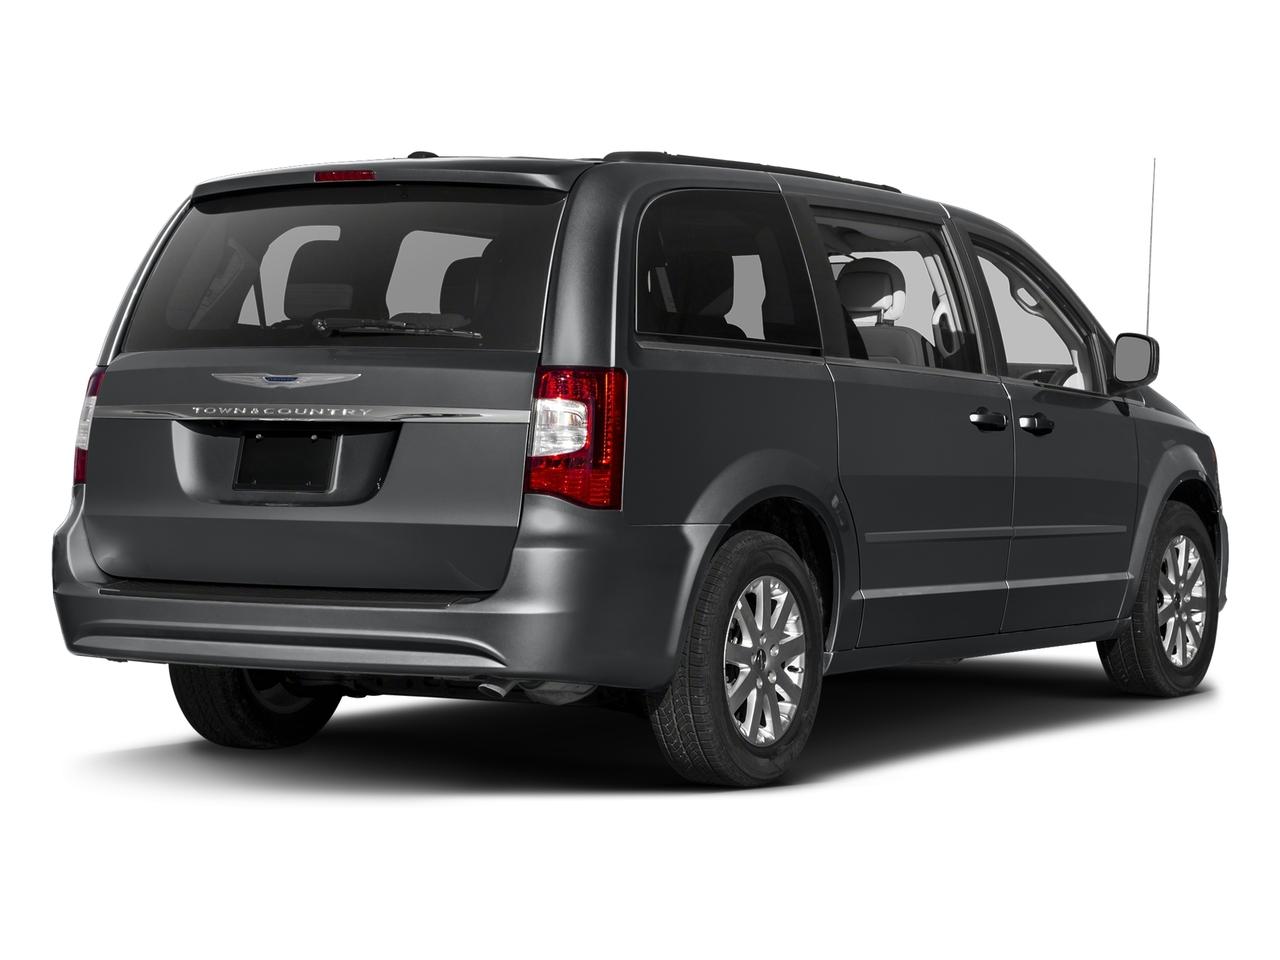 2016 Chrysler Town & Country Vehicle Photo in Sanford, FL 32771